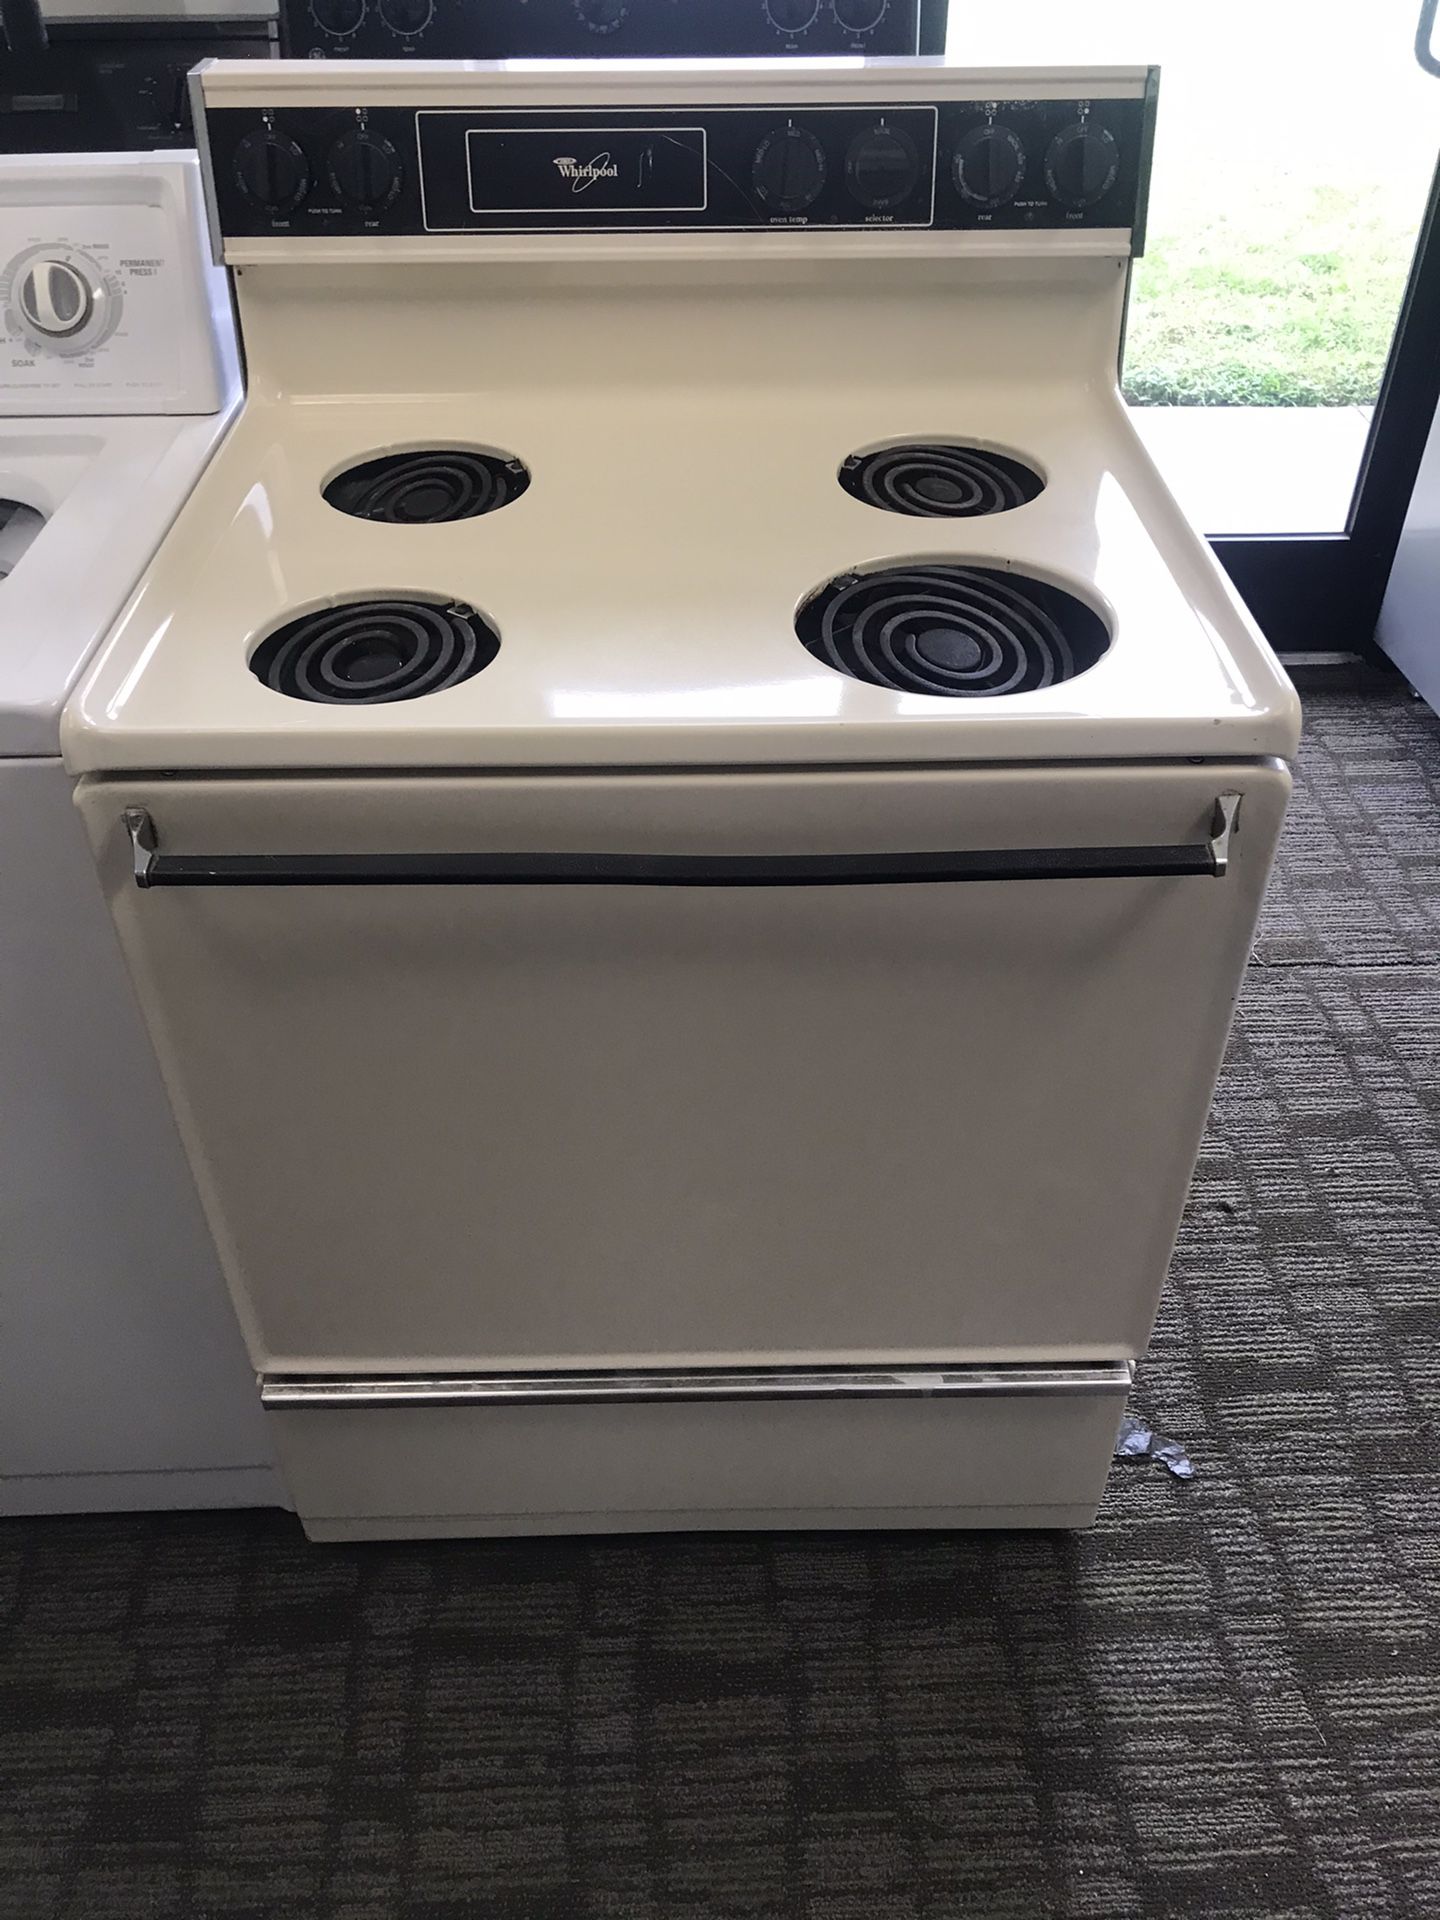 USED WHIRLPOOL OFF WHITE ELECTRIC STOVE OVEN COMES WITH 60 DAY WARRANTY